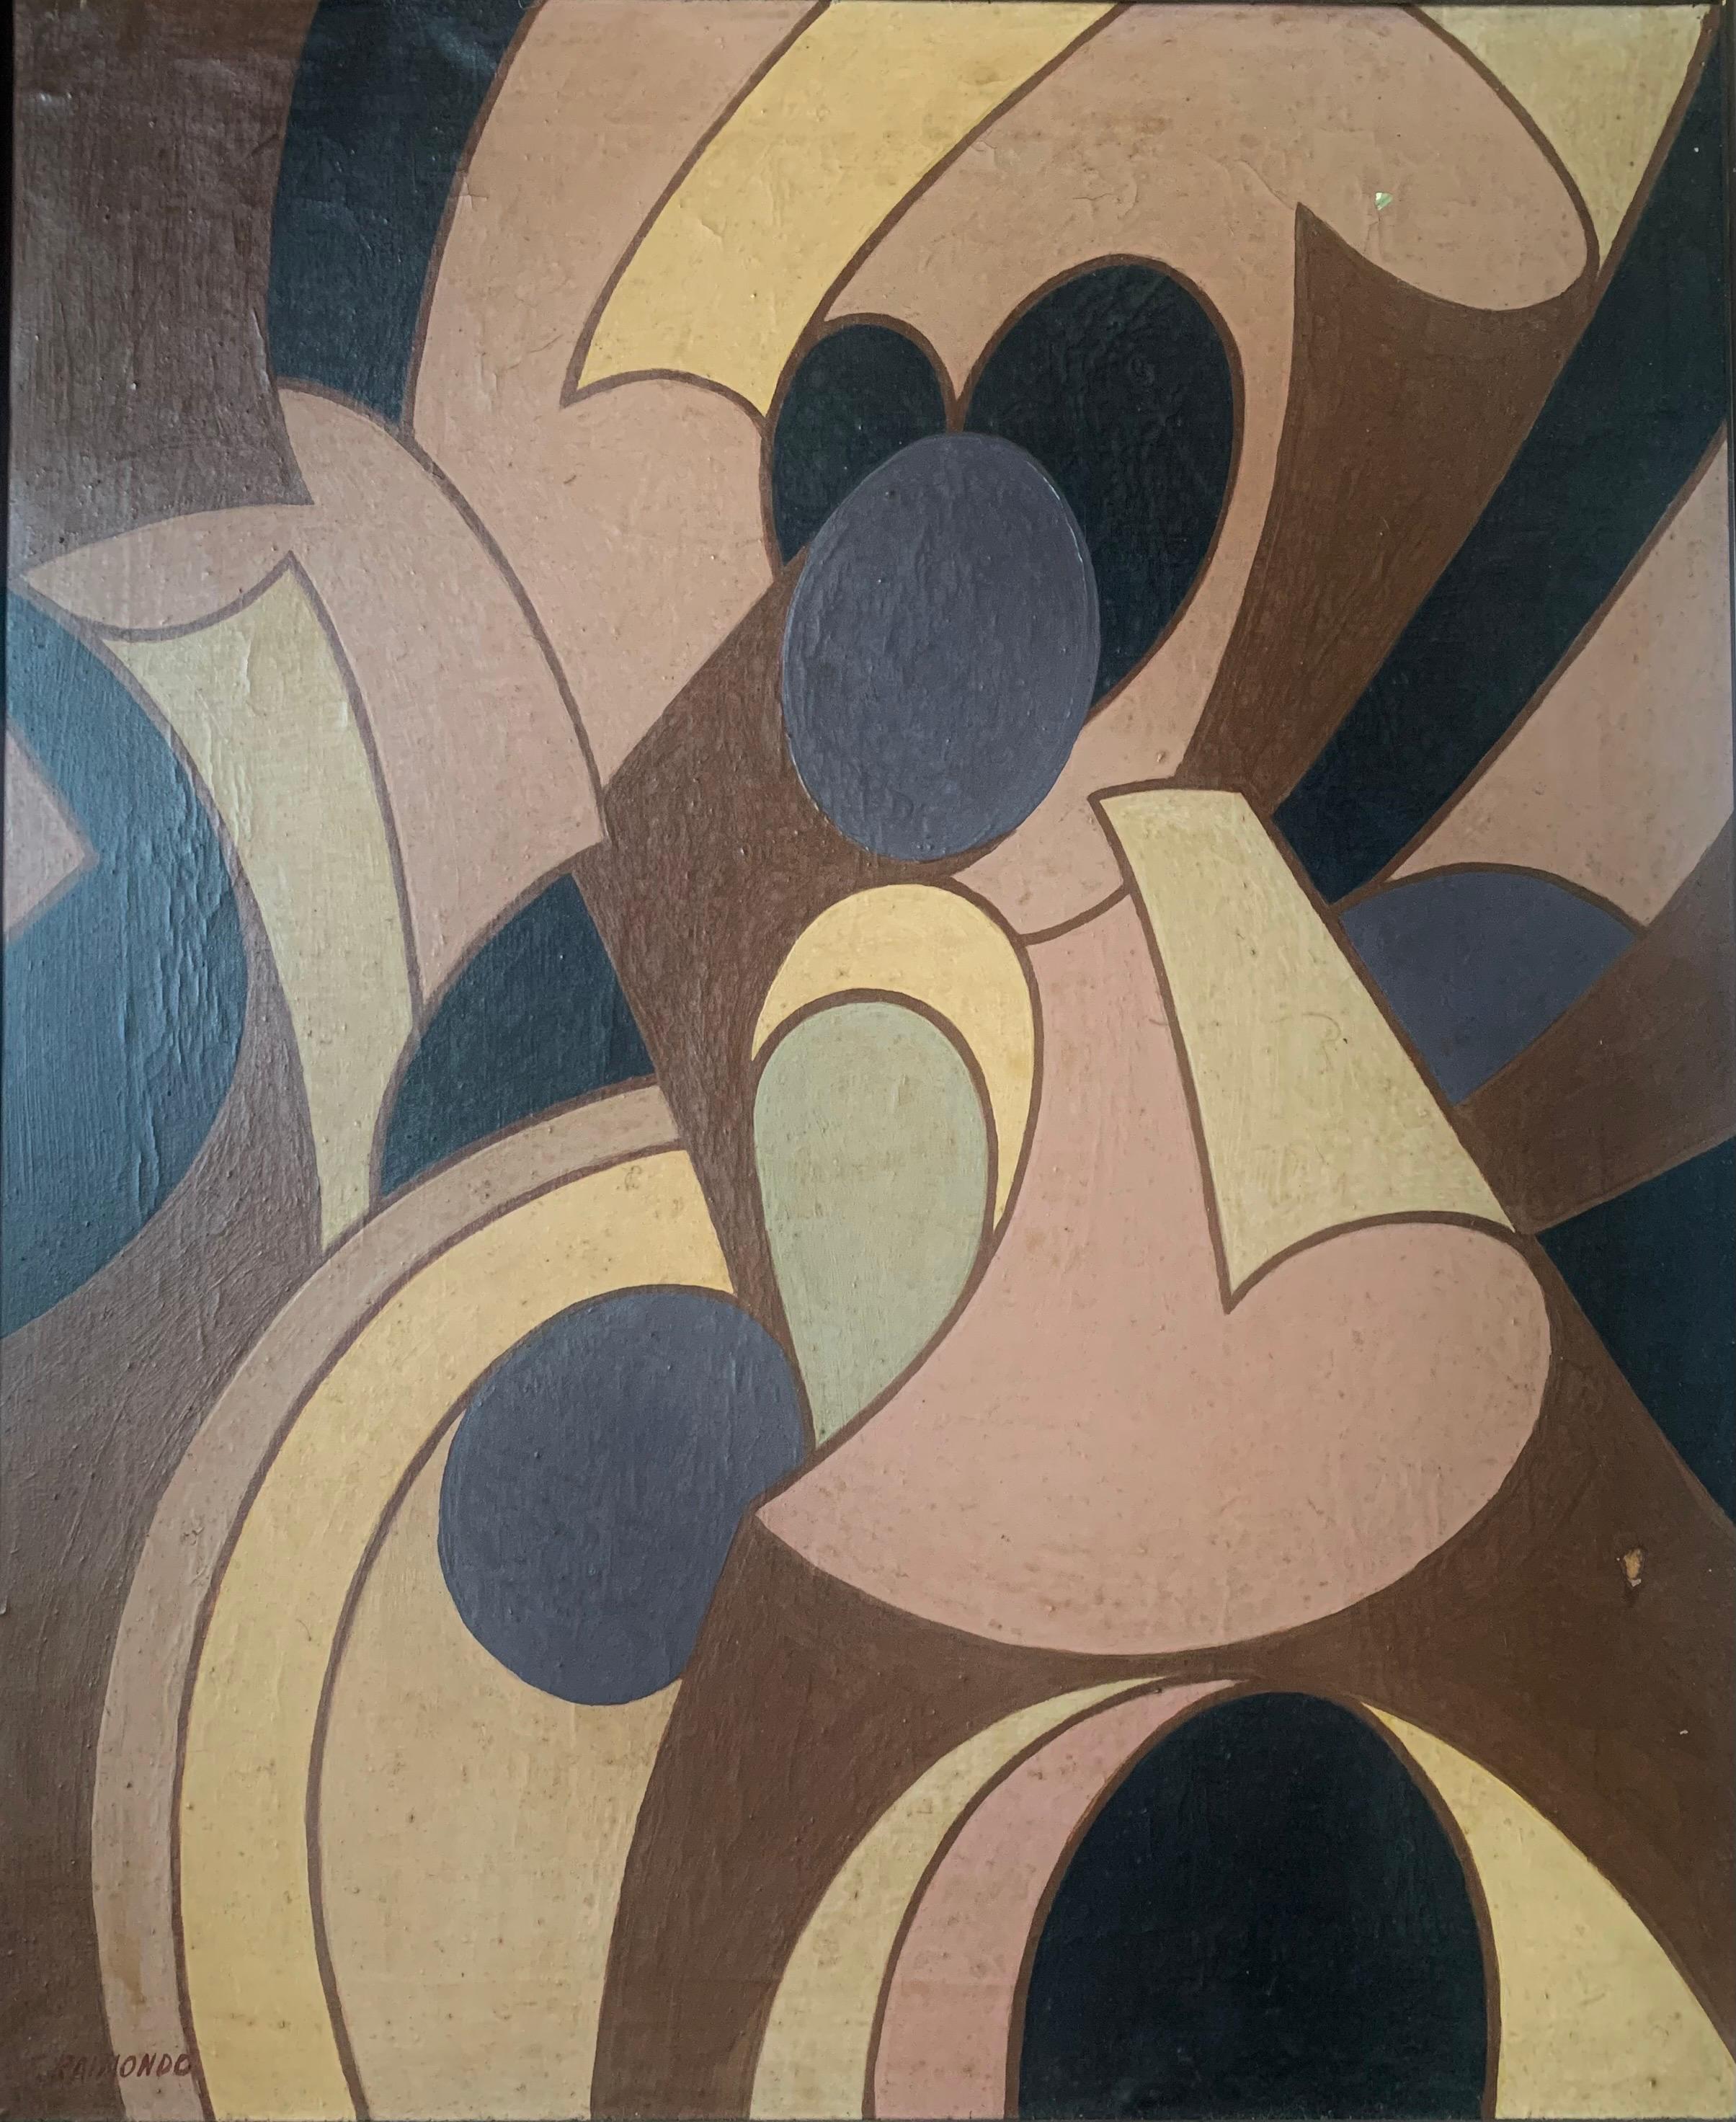 Still-Life Painting di Unknown - Abstract Painting With Rolled painter's Canvases. 1970.  Signed F. Raimondo